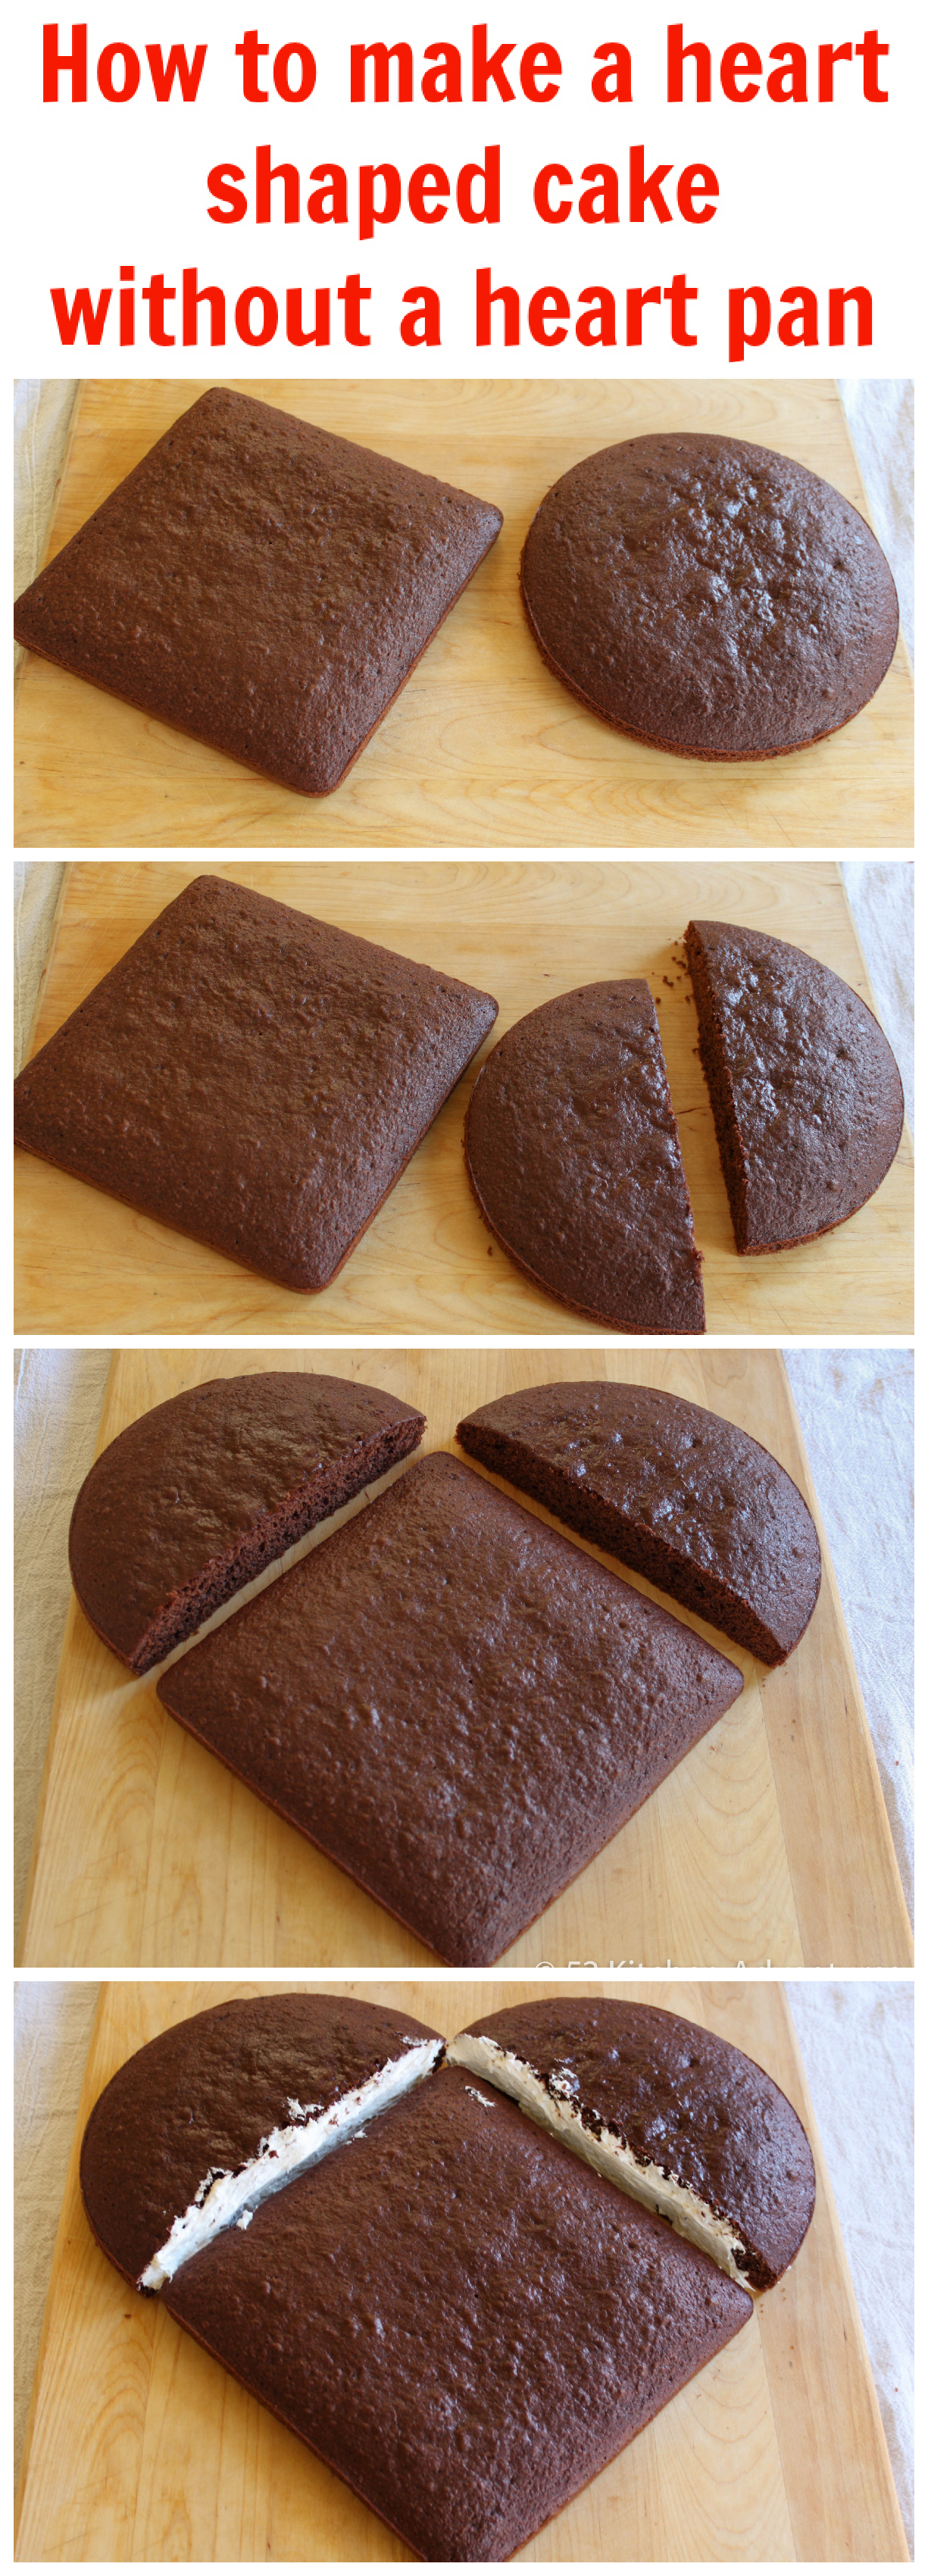 How to make a heart shaped cake without a heart pan